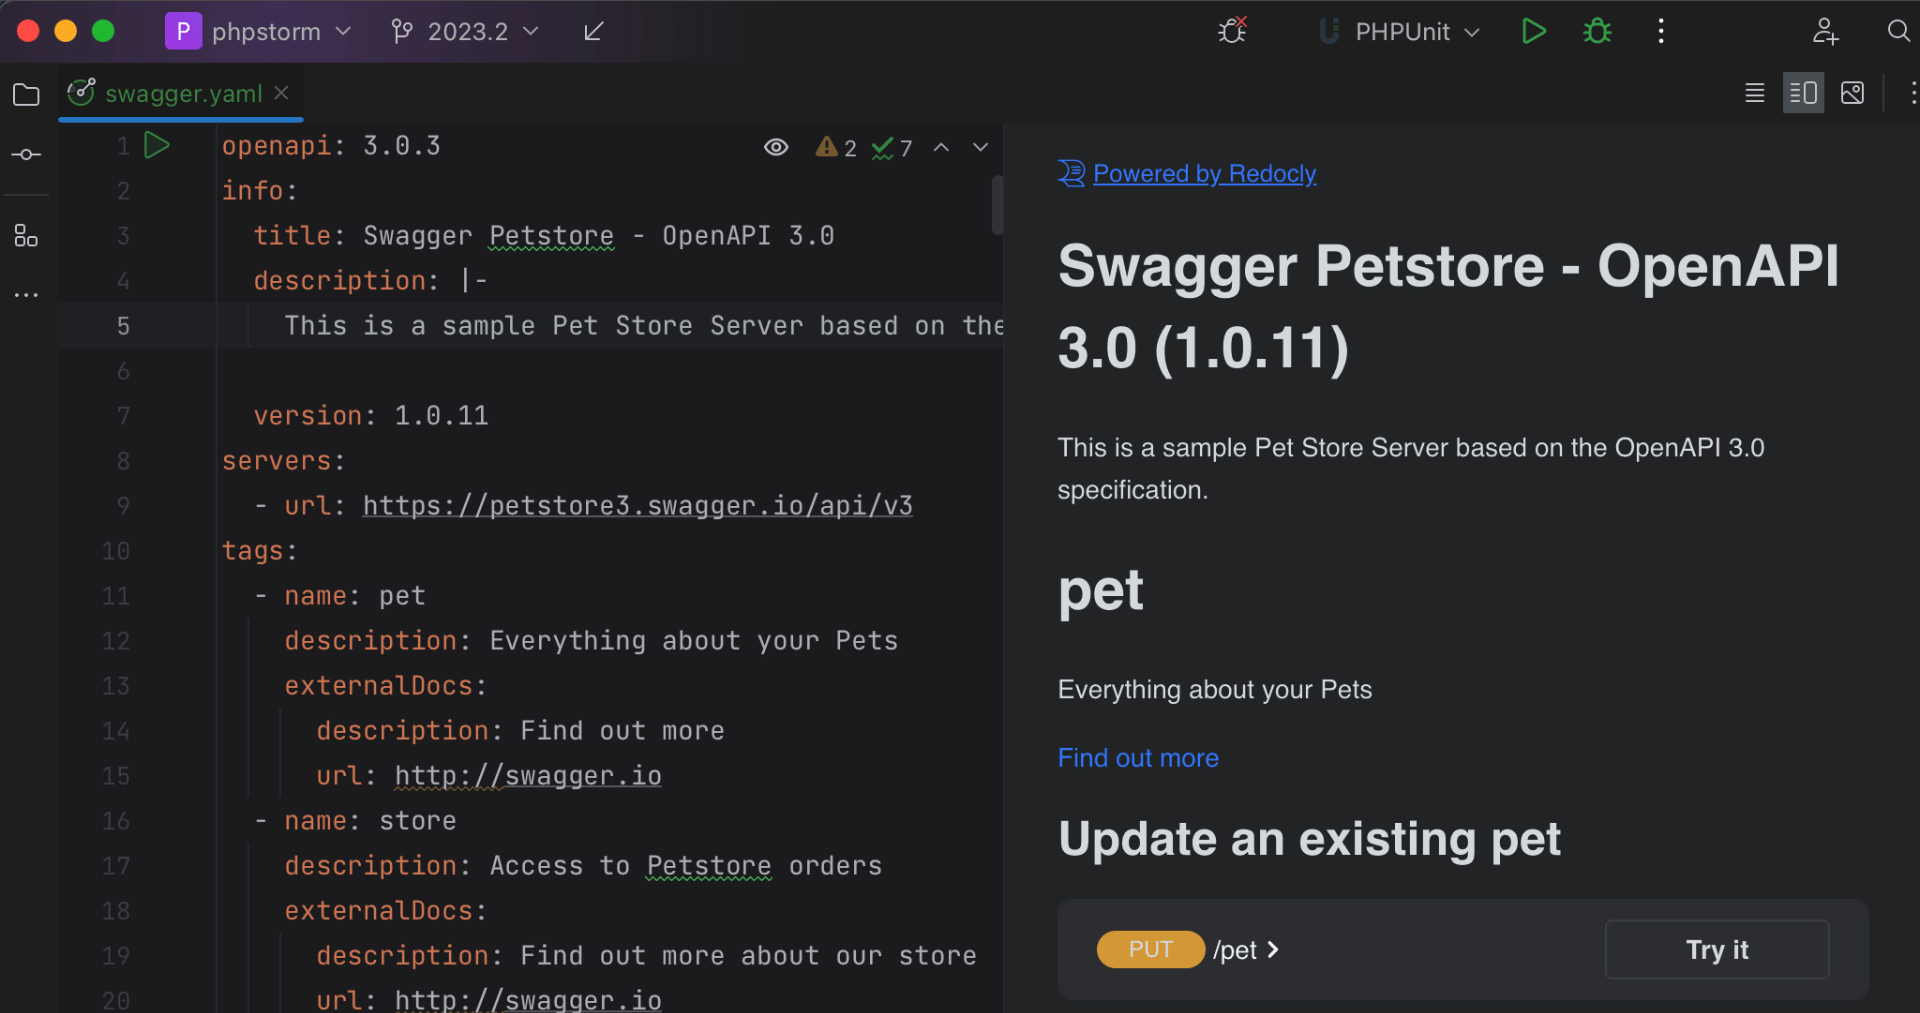 Redoc UI previews for OpenAPI and Swagger files